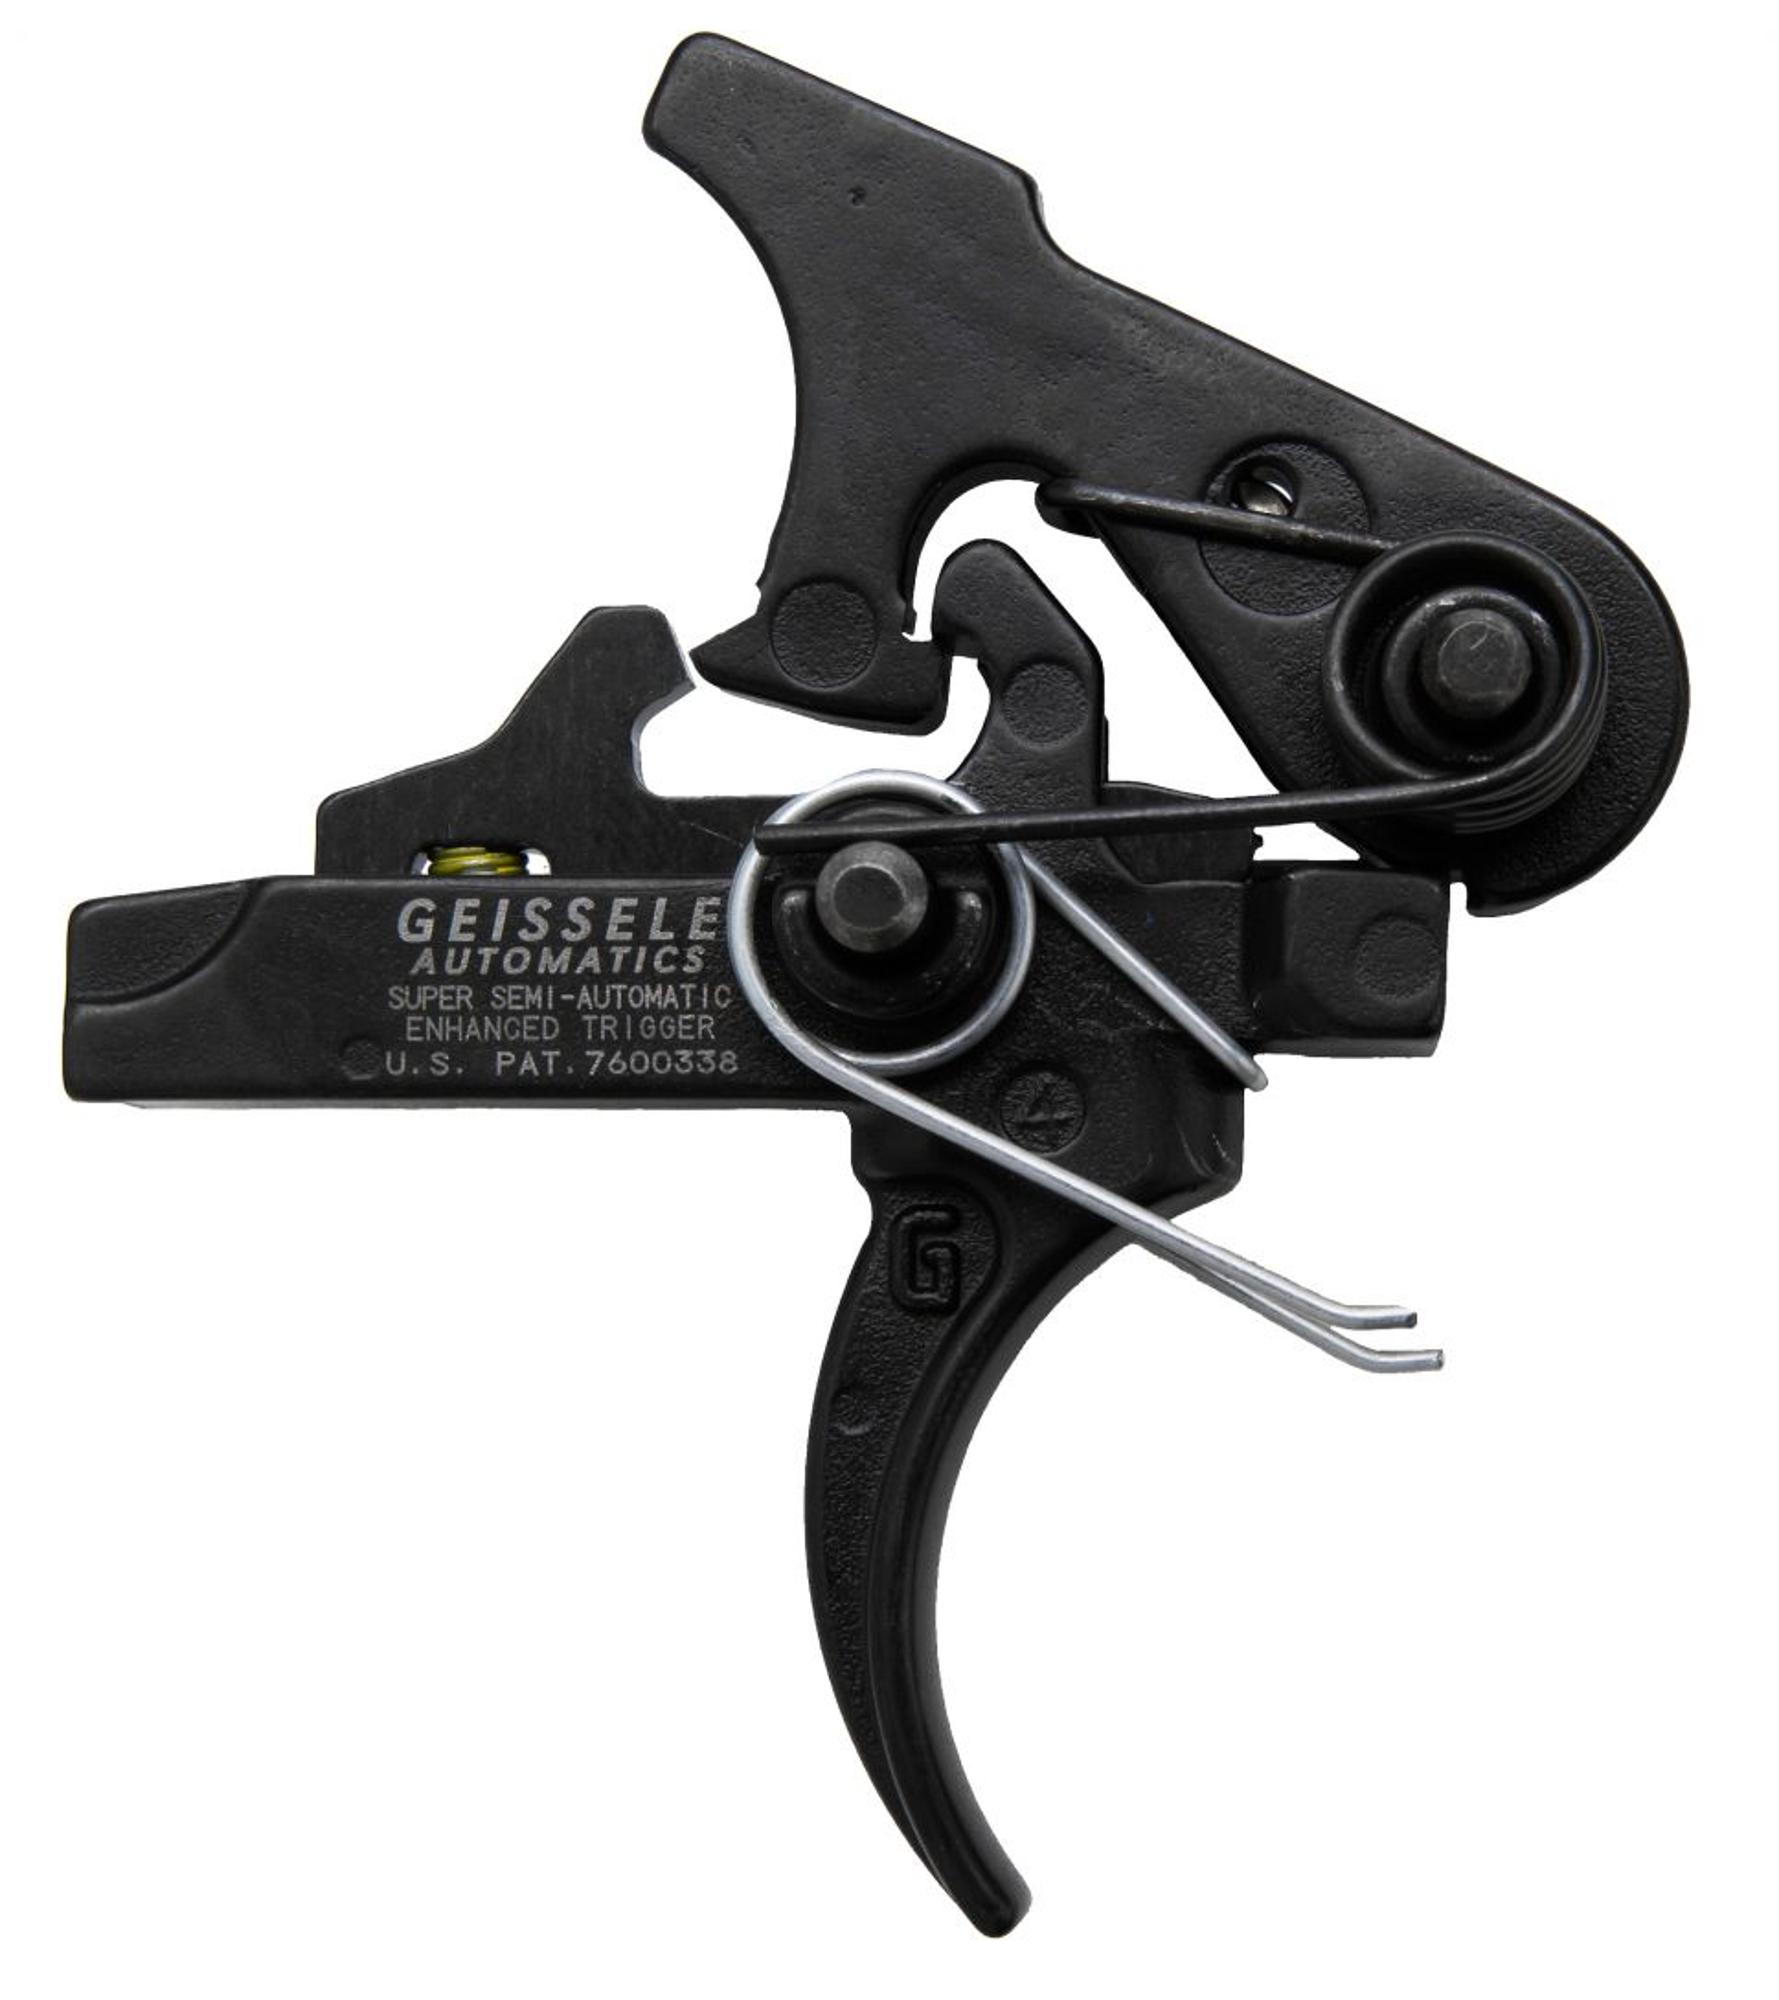  Ssa- E 2- Stage Curved Trigger